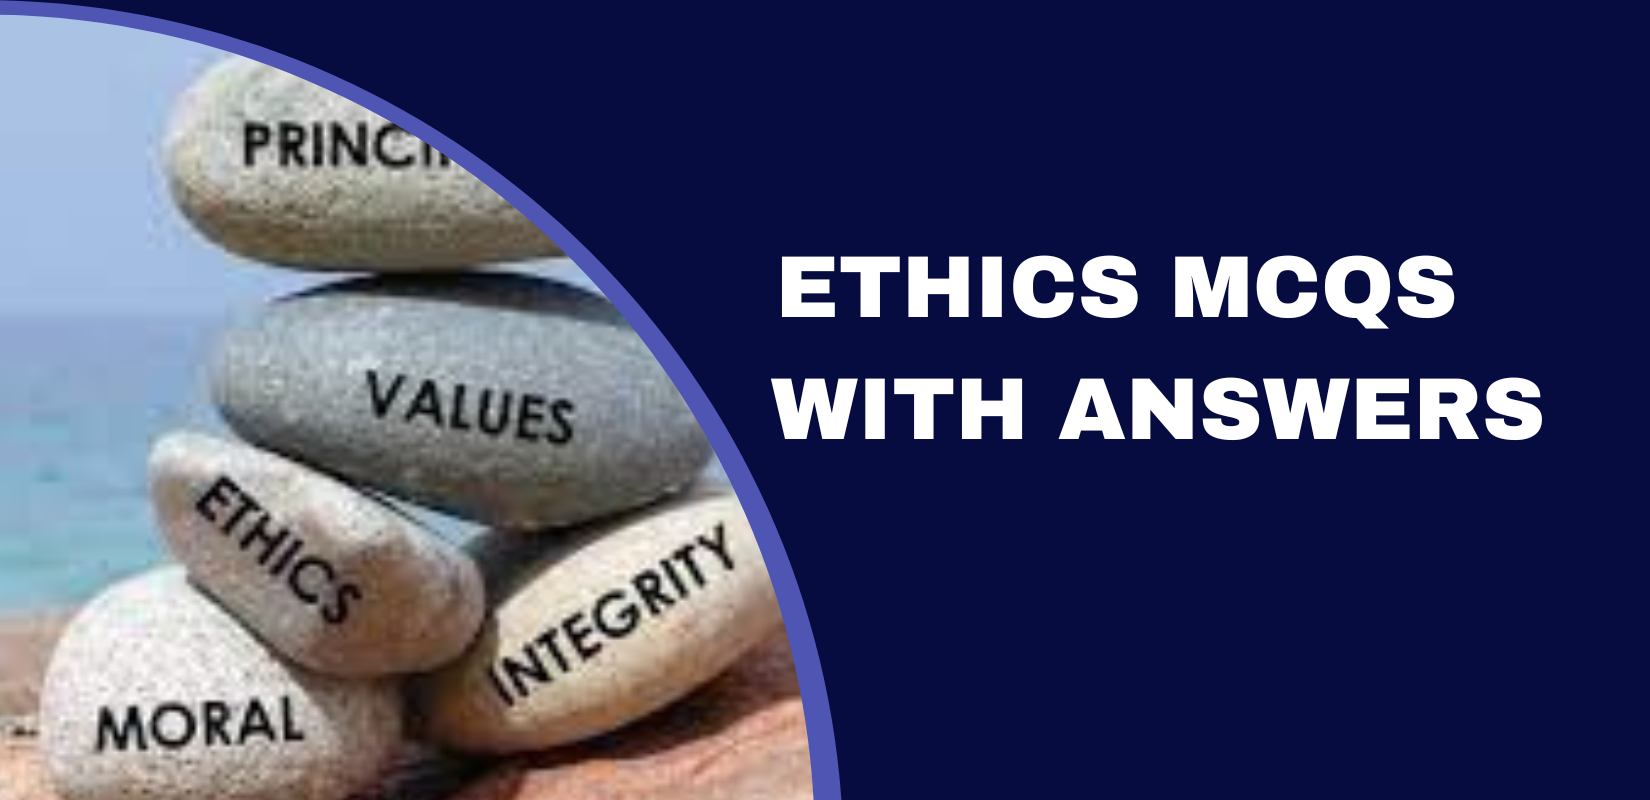 Ethics MCQs with answers